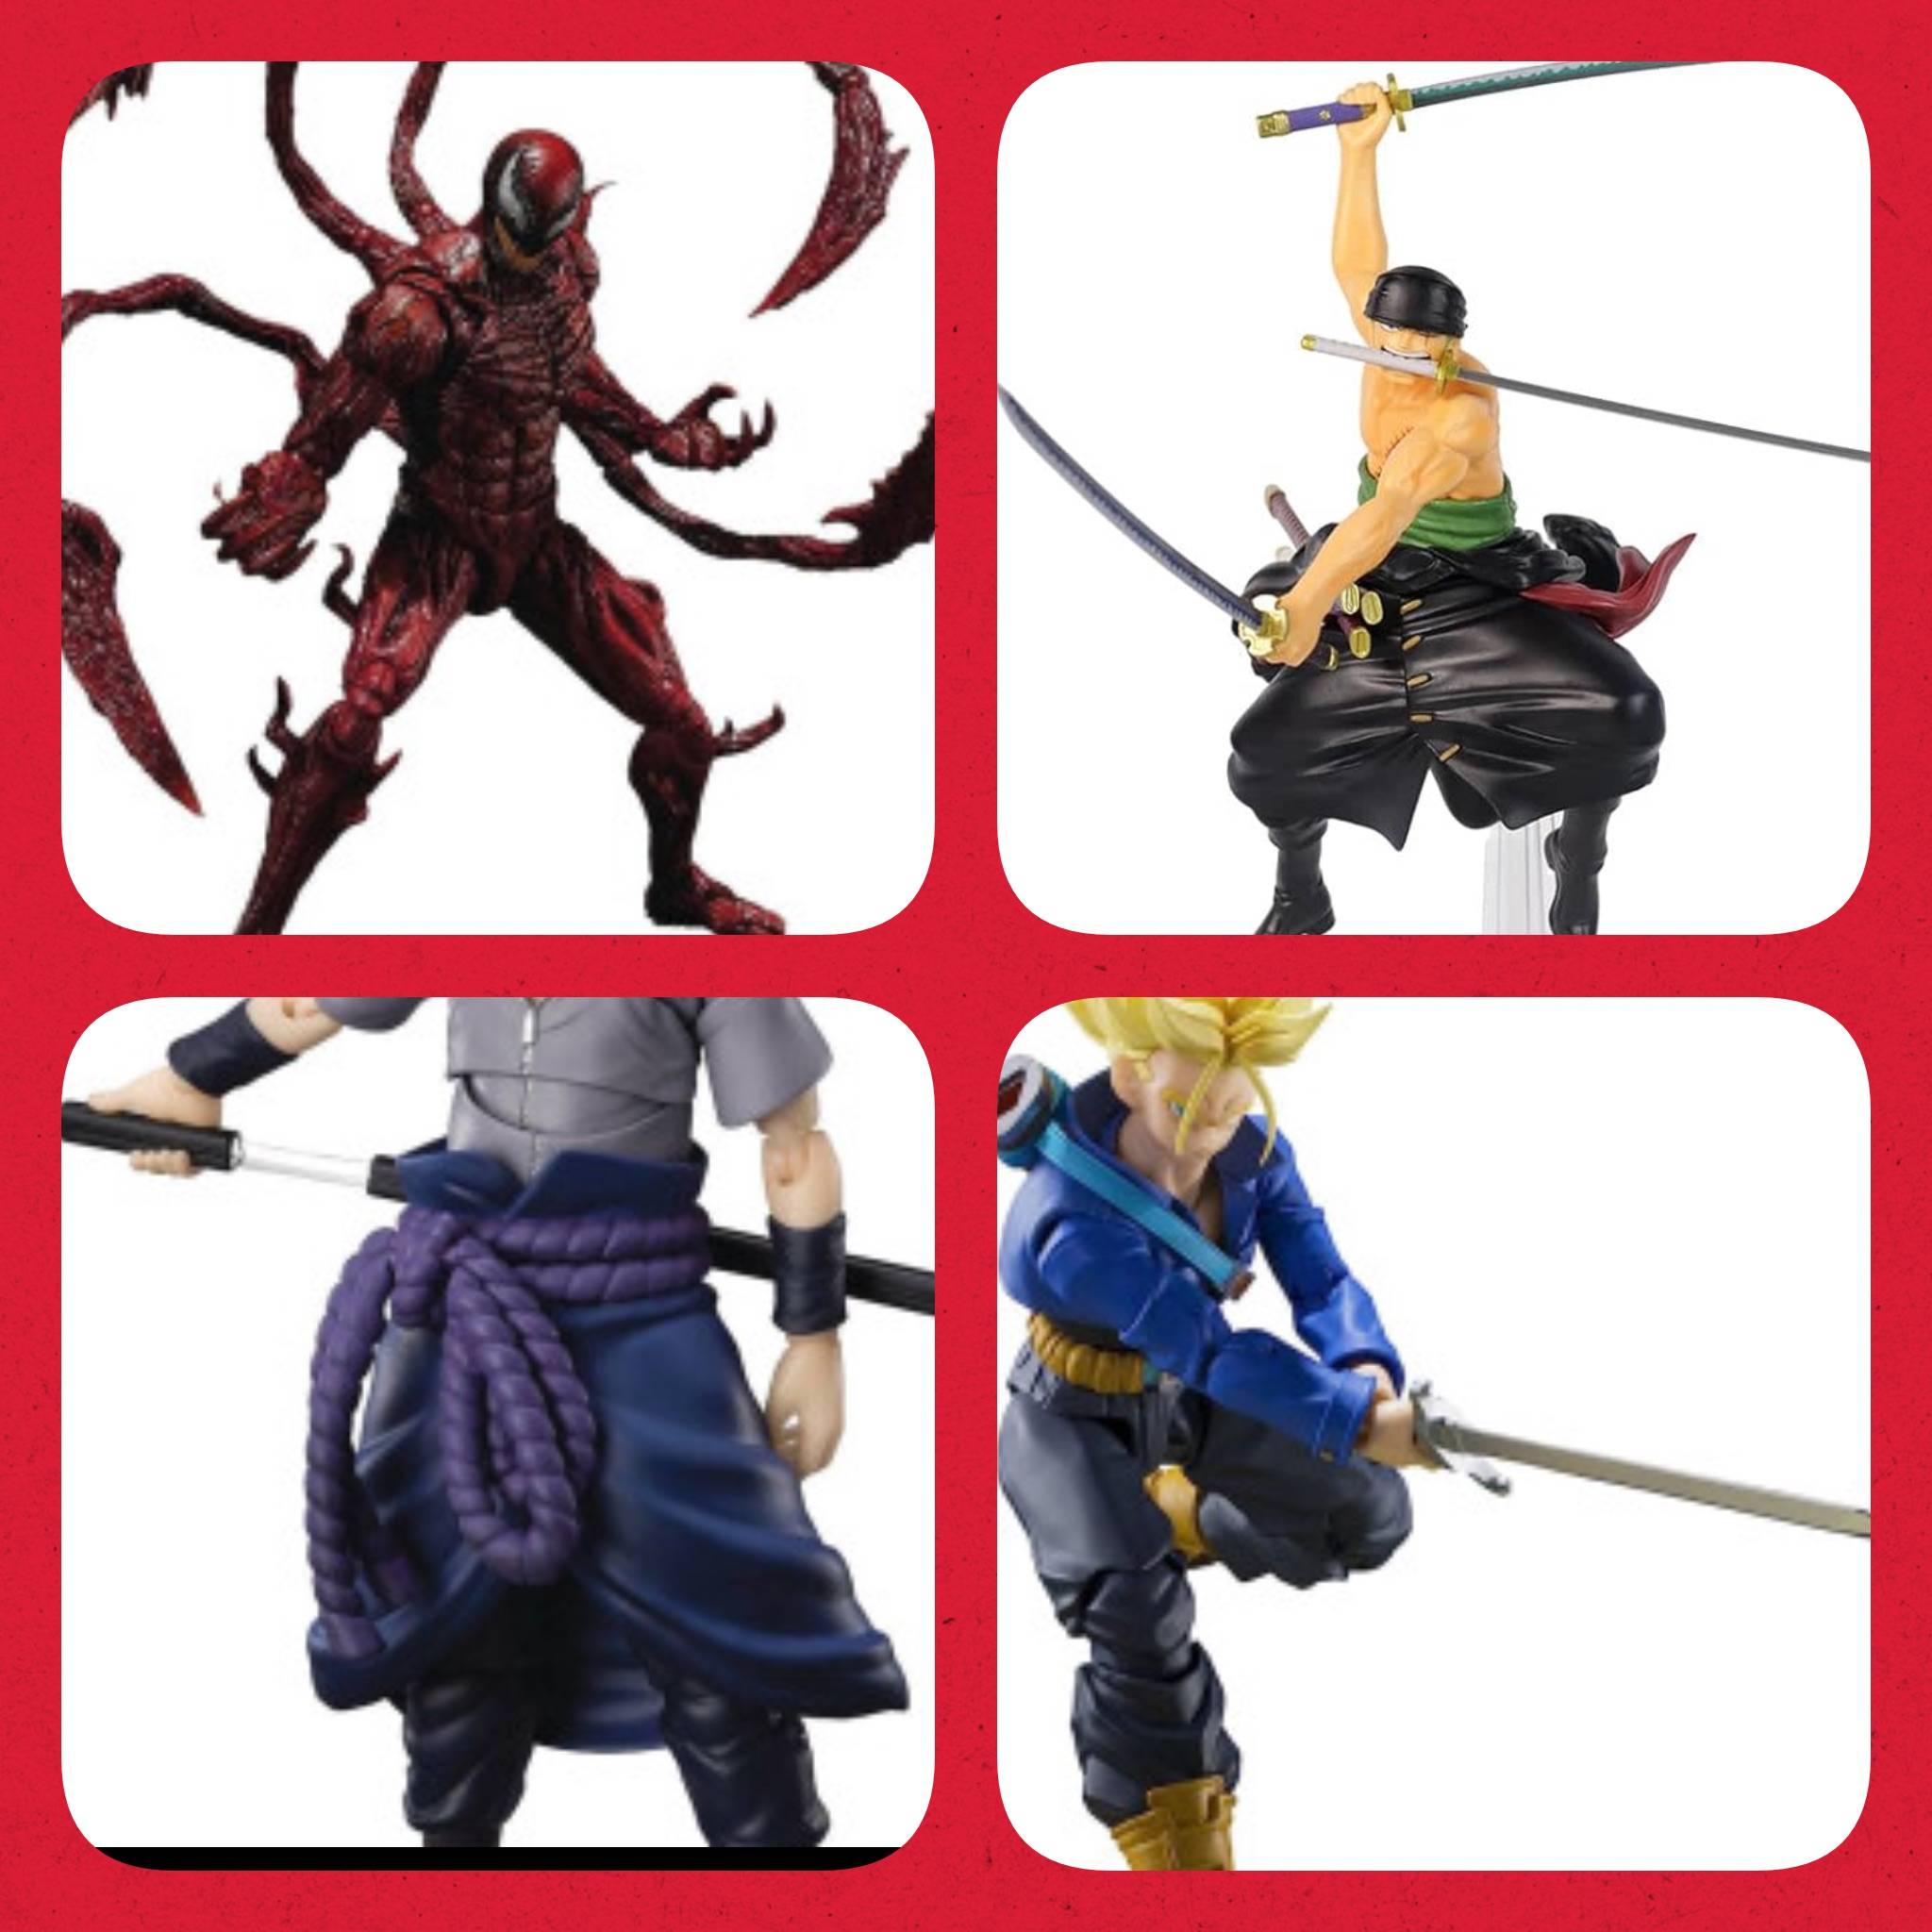 Bandai Figurines - Collectible and Detailed